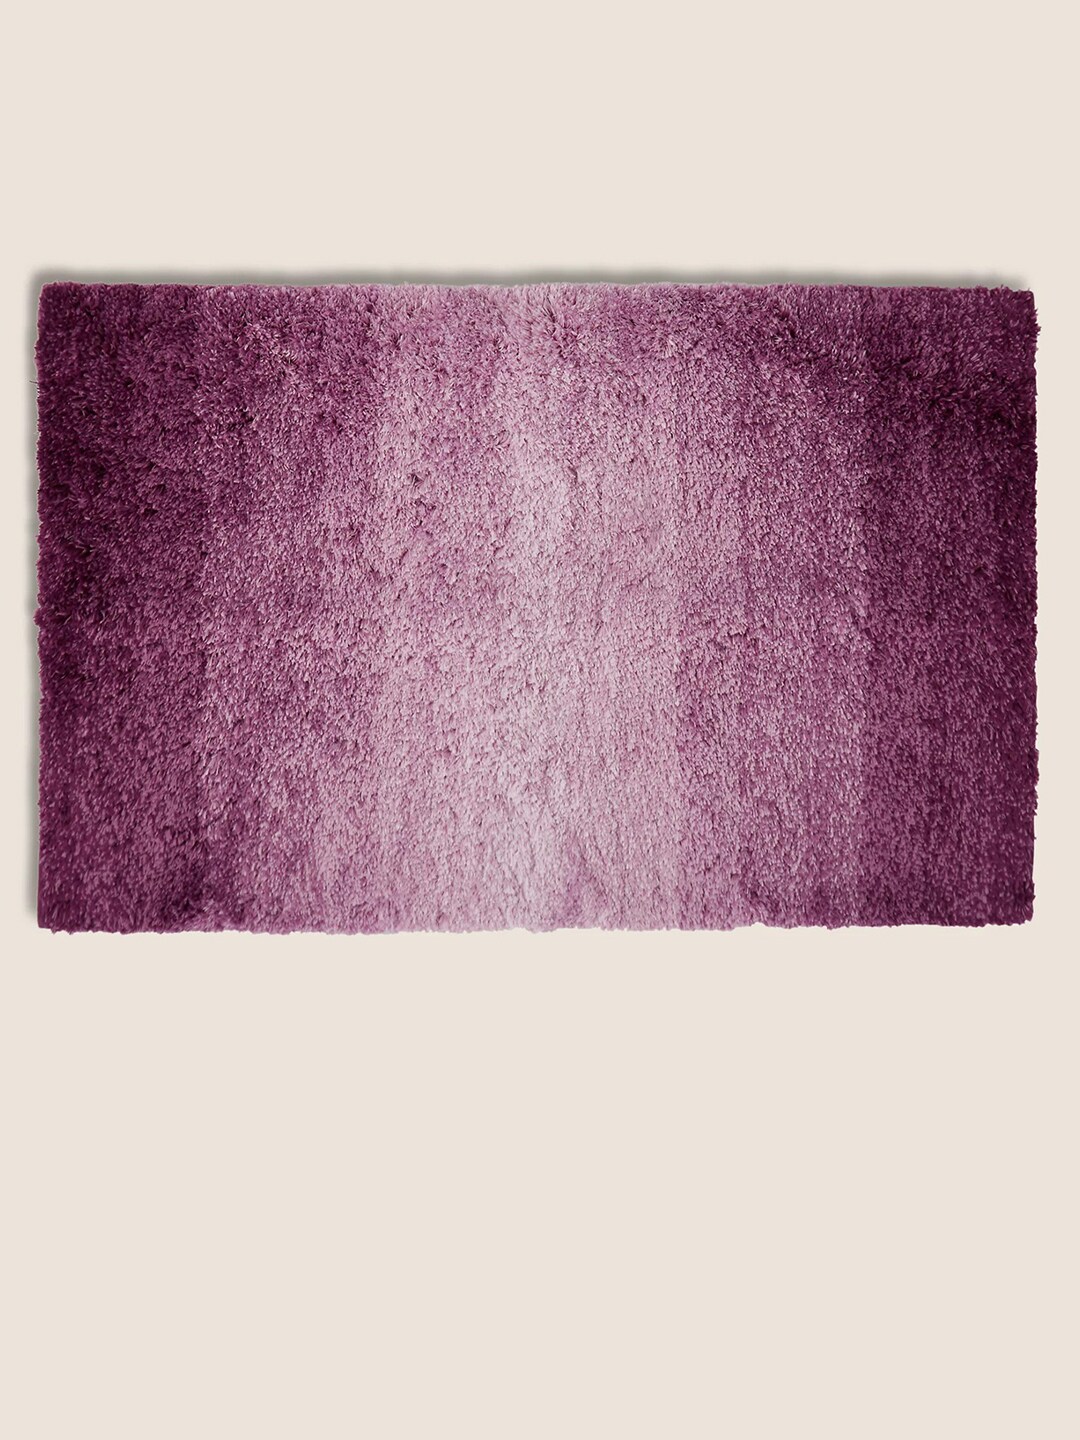 Marks & Spencer Purple Latex Back Bath Rugs Price in India